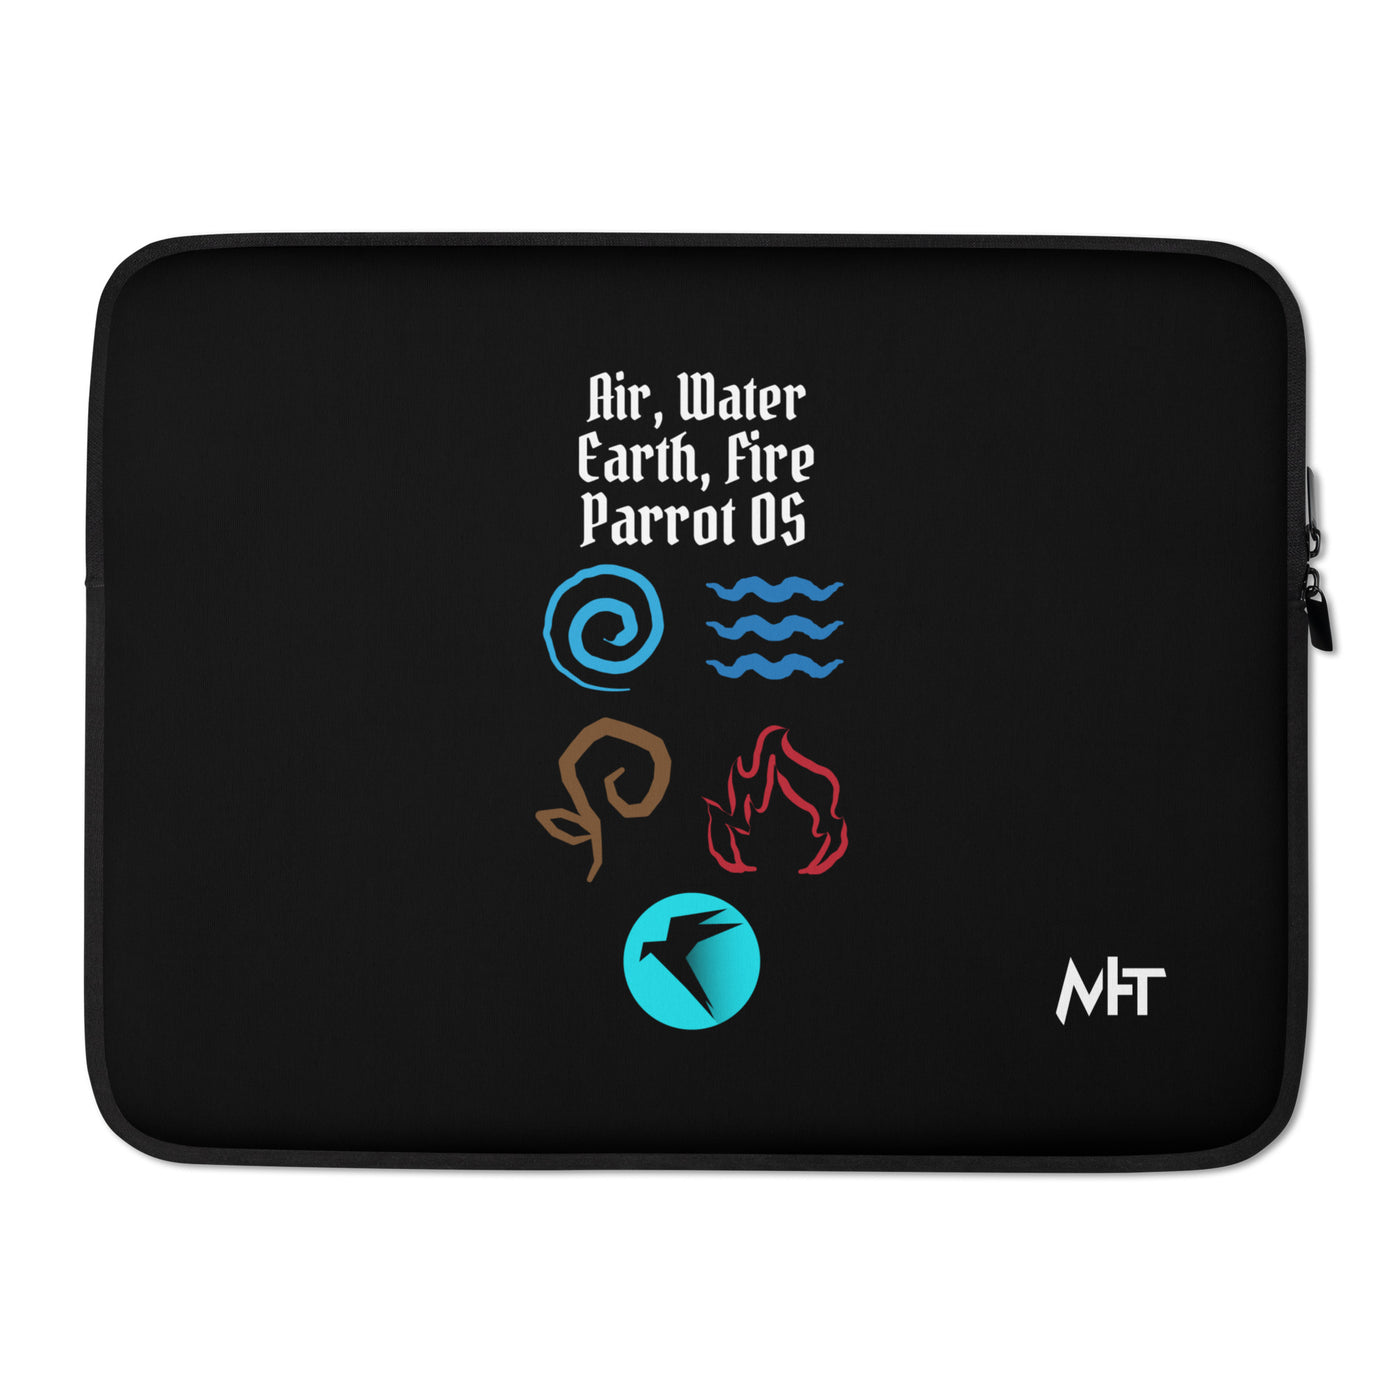 Air, Water, Earth, Fire, Parrot OS - Laptop Sleeve